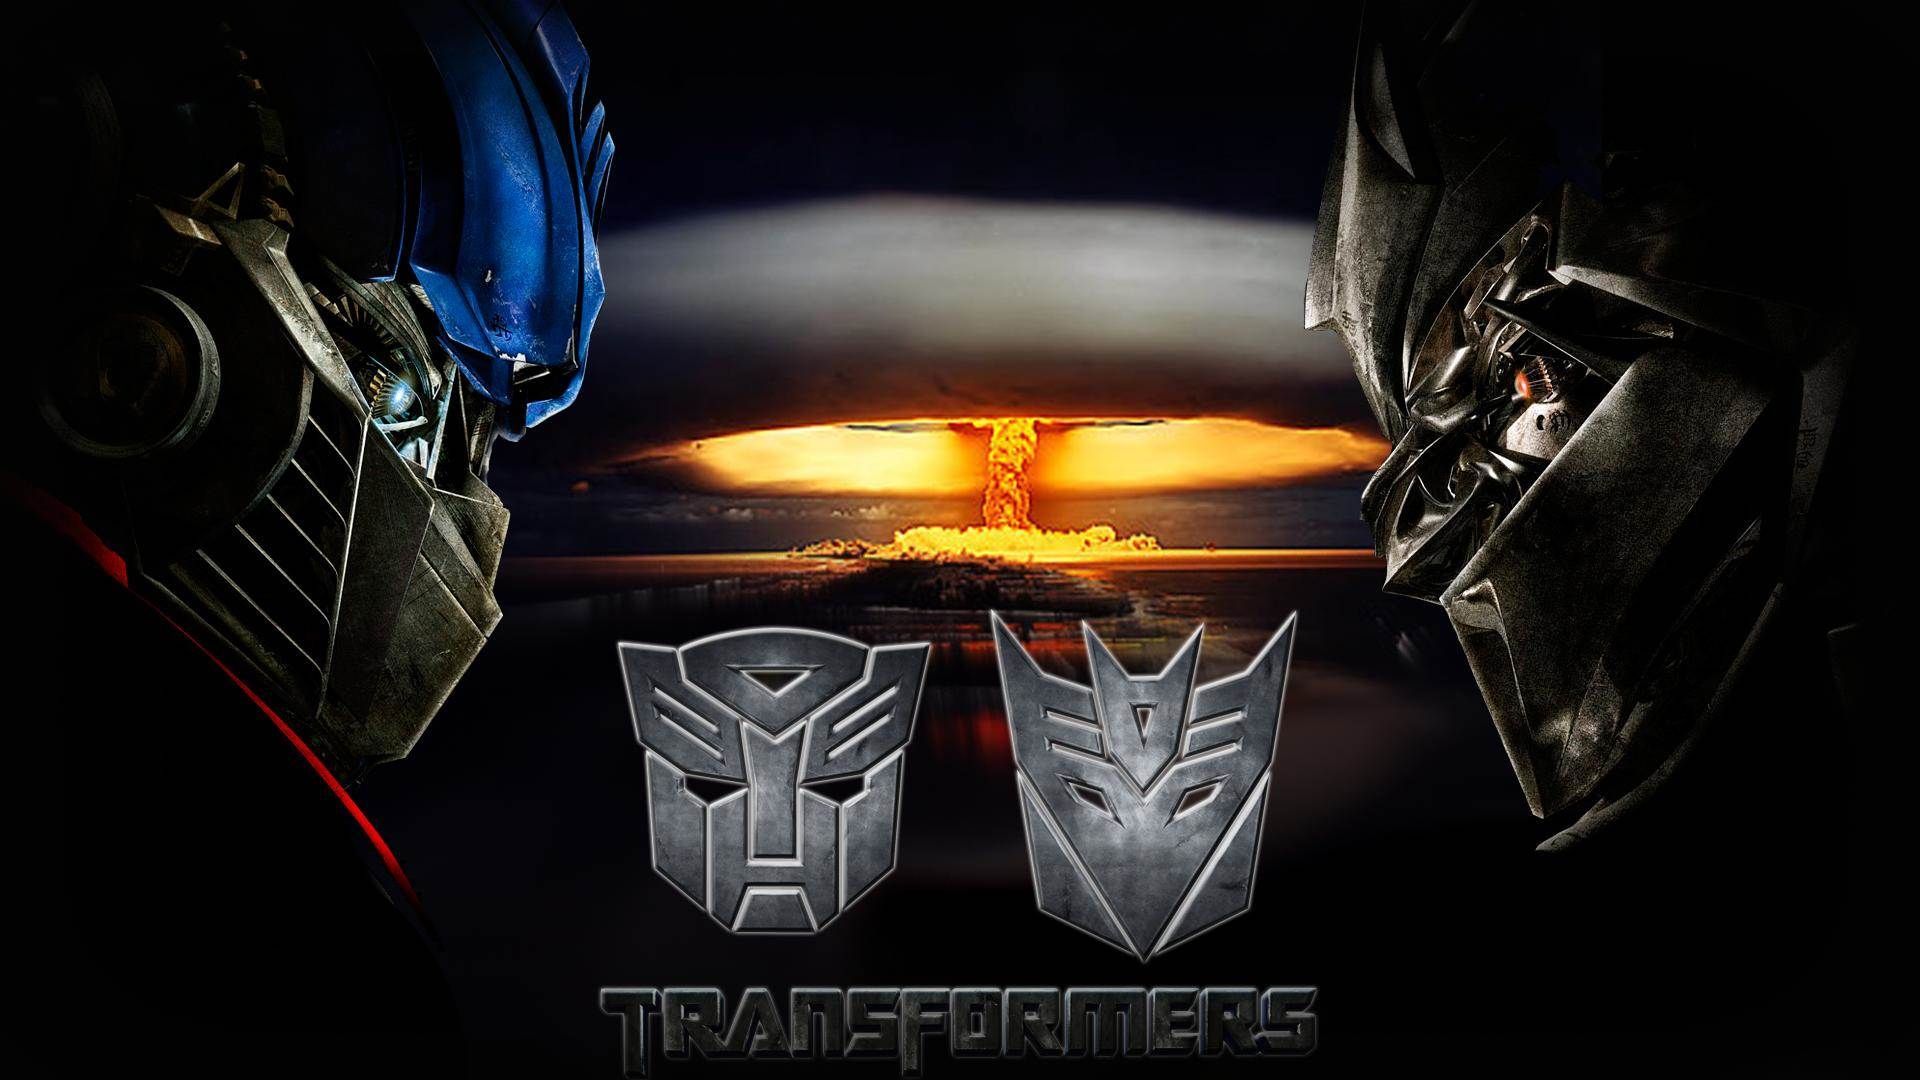 Transformers movie wallpaper HD quality download 1920×1080